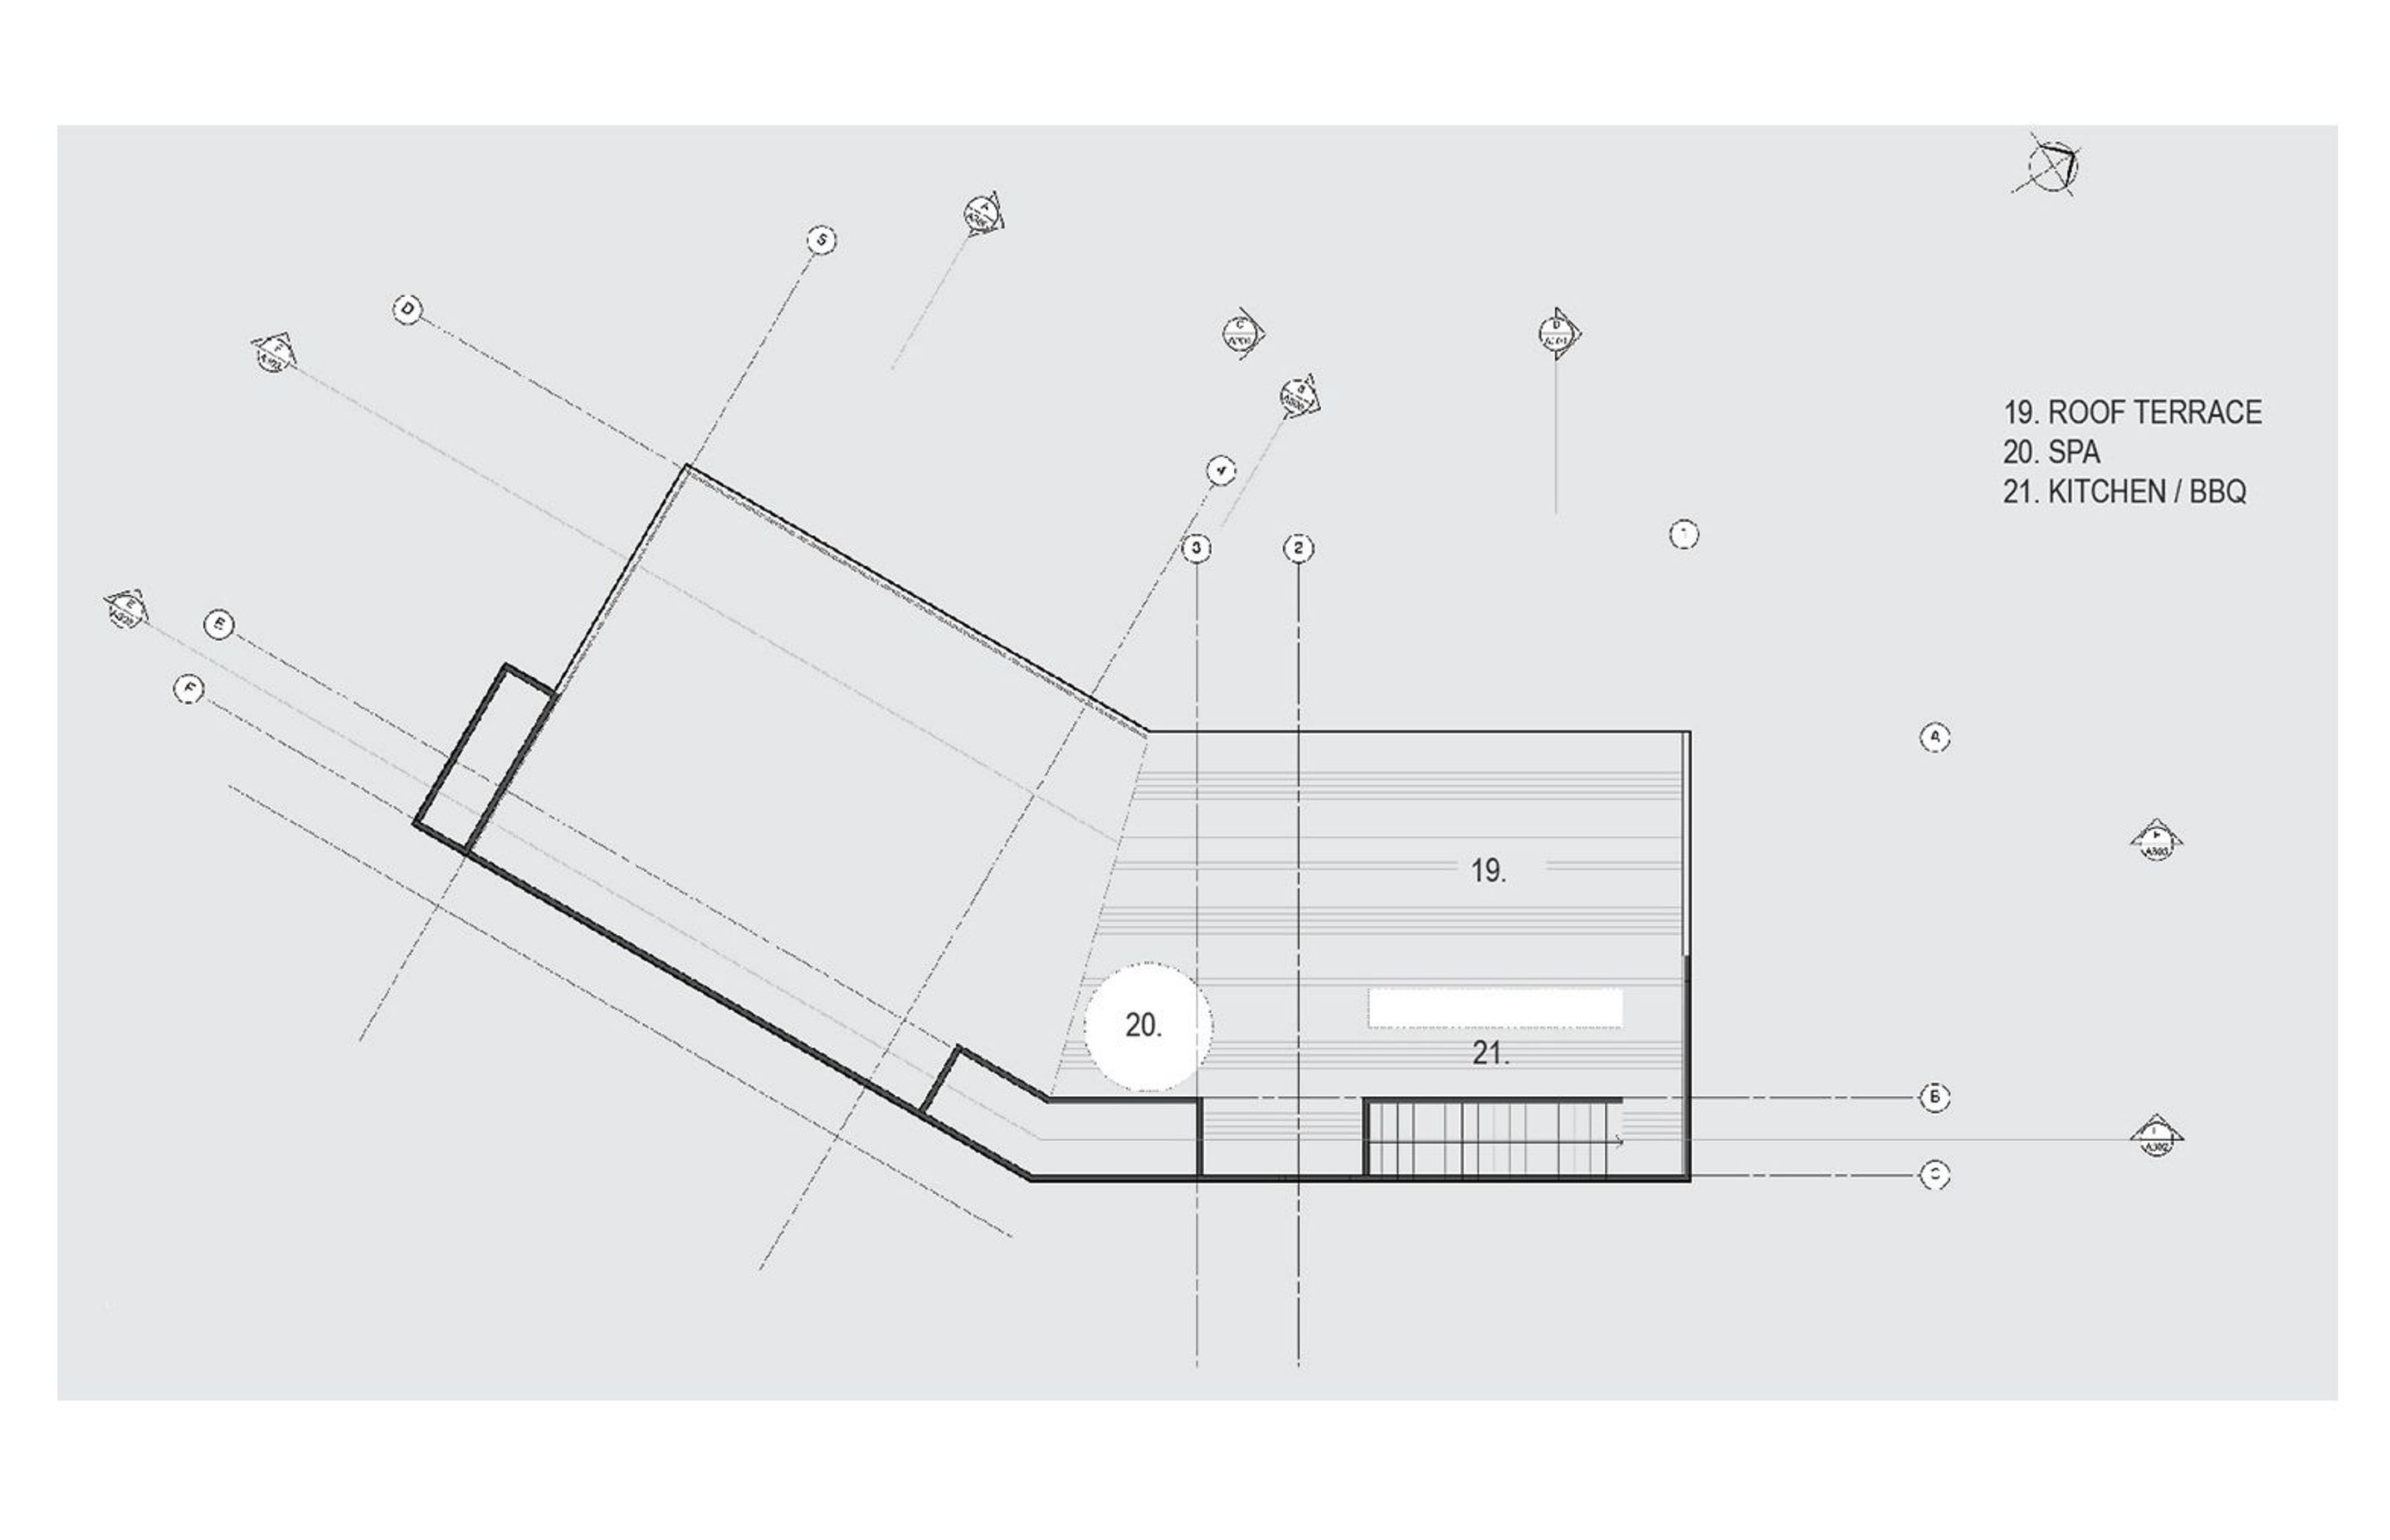 The plan of the roof terrace, by Urban Function Architecture.